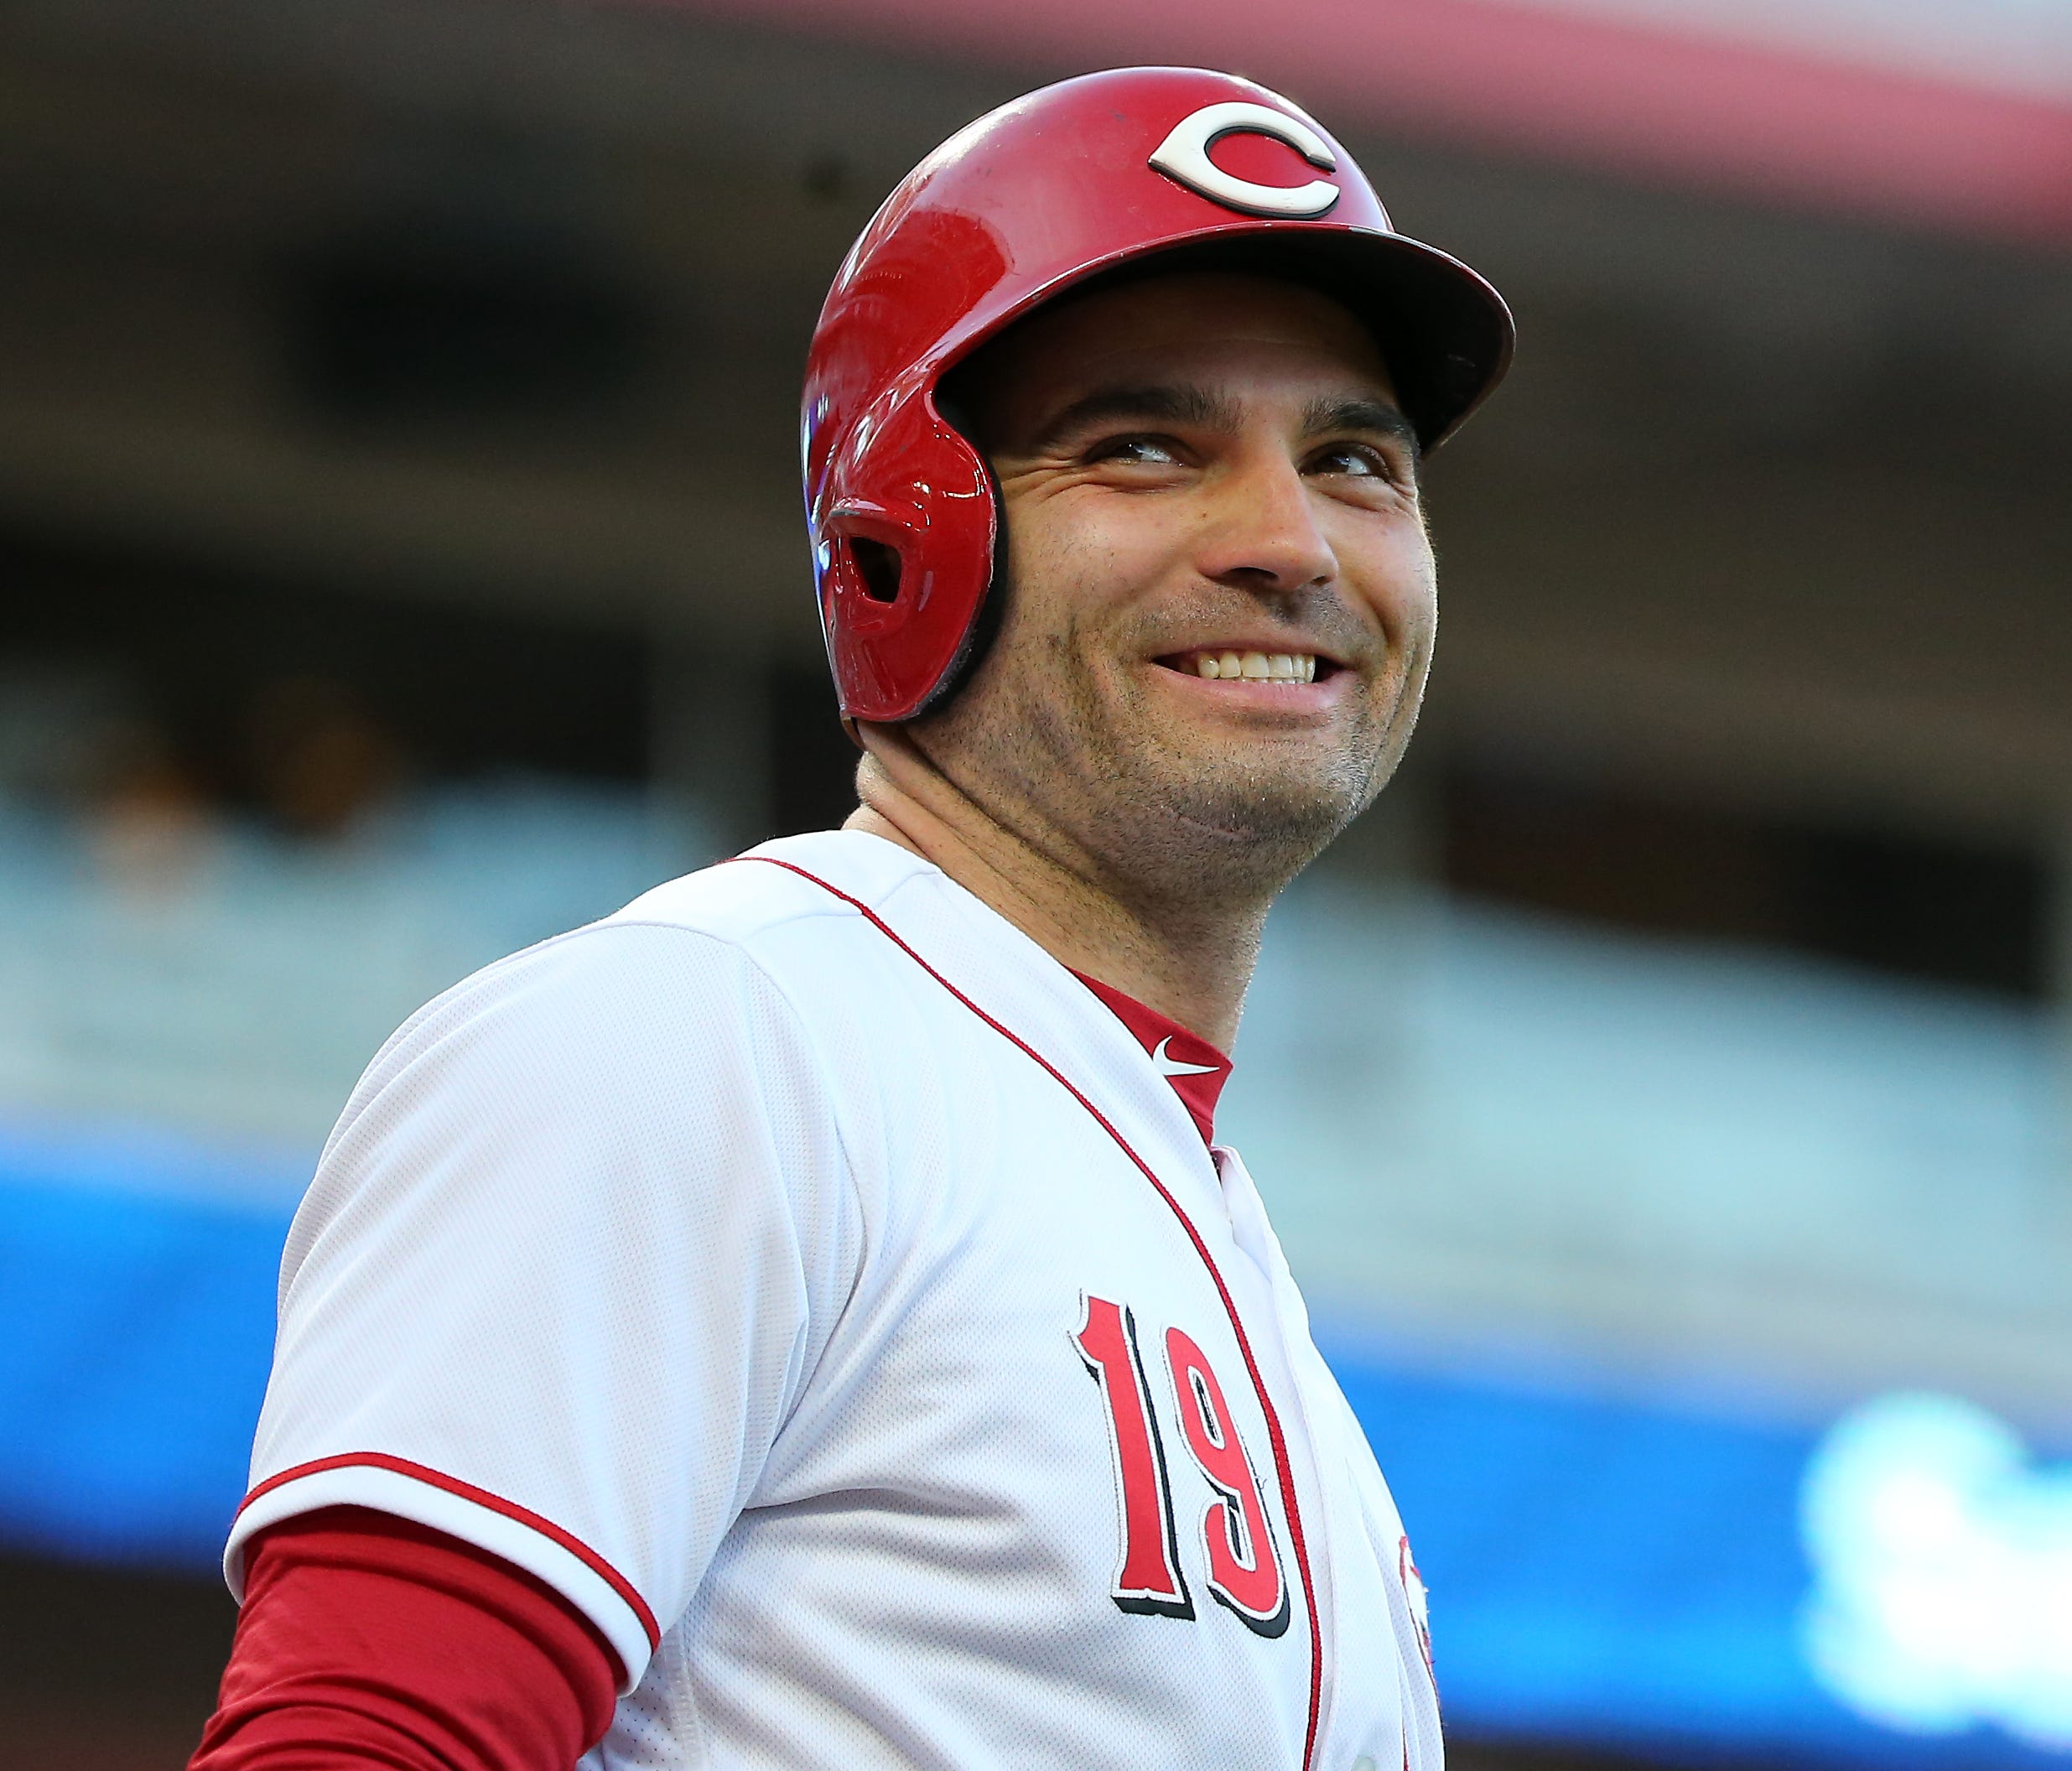 Cincinnati Reds first baseman Joey Votto (19) smiles to the fans while in the on-deck circle in the first inning during a National League baseball game between the Milwaukee Brewers and the Cincinnati Reds, Tuesday, May 1, 2018, at Great American Bal